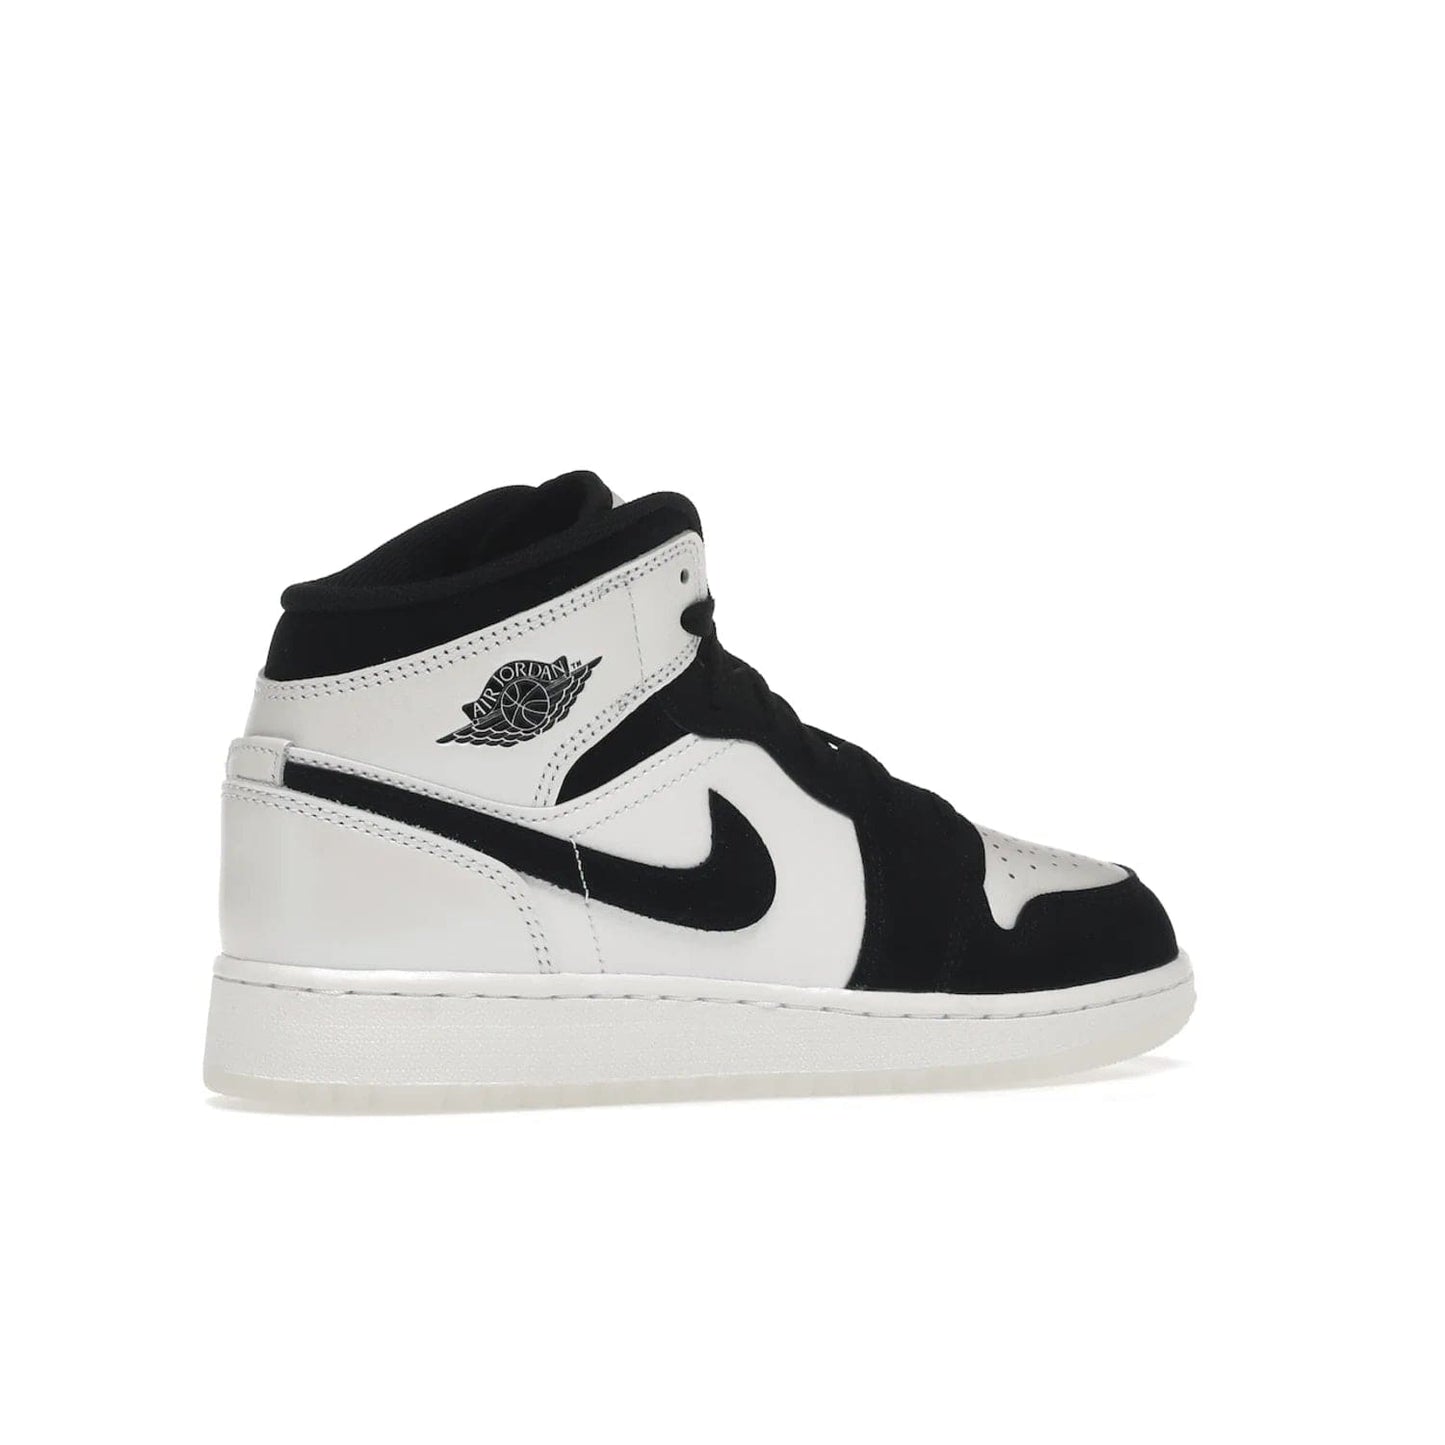 Jordan 1 Mid Diamond Shorts (GS) - Image 34 - Only at www.BallersClubKickz.com - Get the Jordan 1 Mid Diamond Shorts GS on 9th Feb 2022! Features a white, black & suede design with nylon tongue, stamped wings logo, rubber midsole & outsole. Only $100!